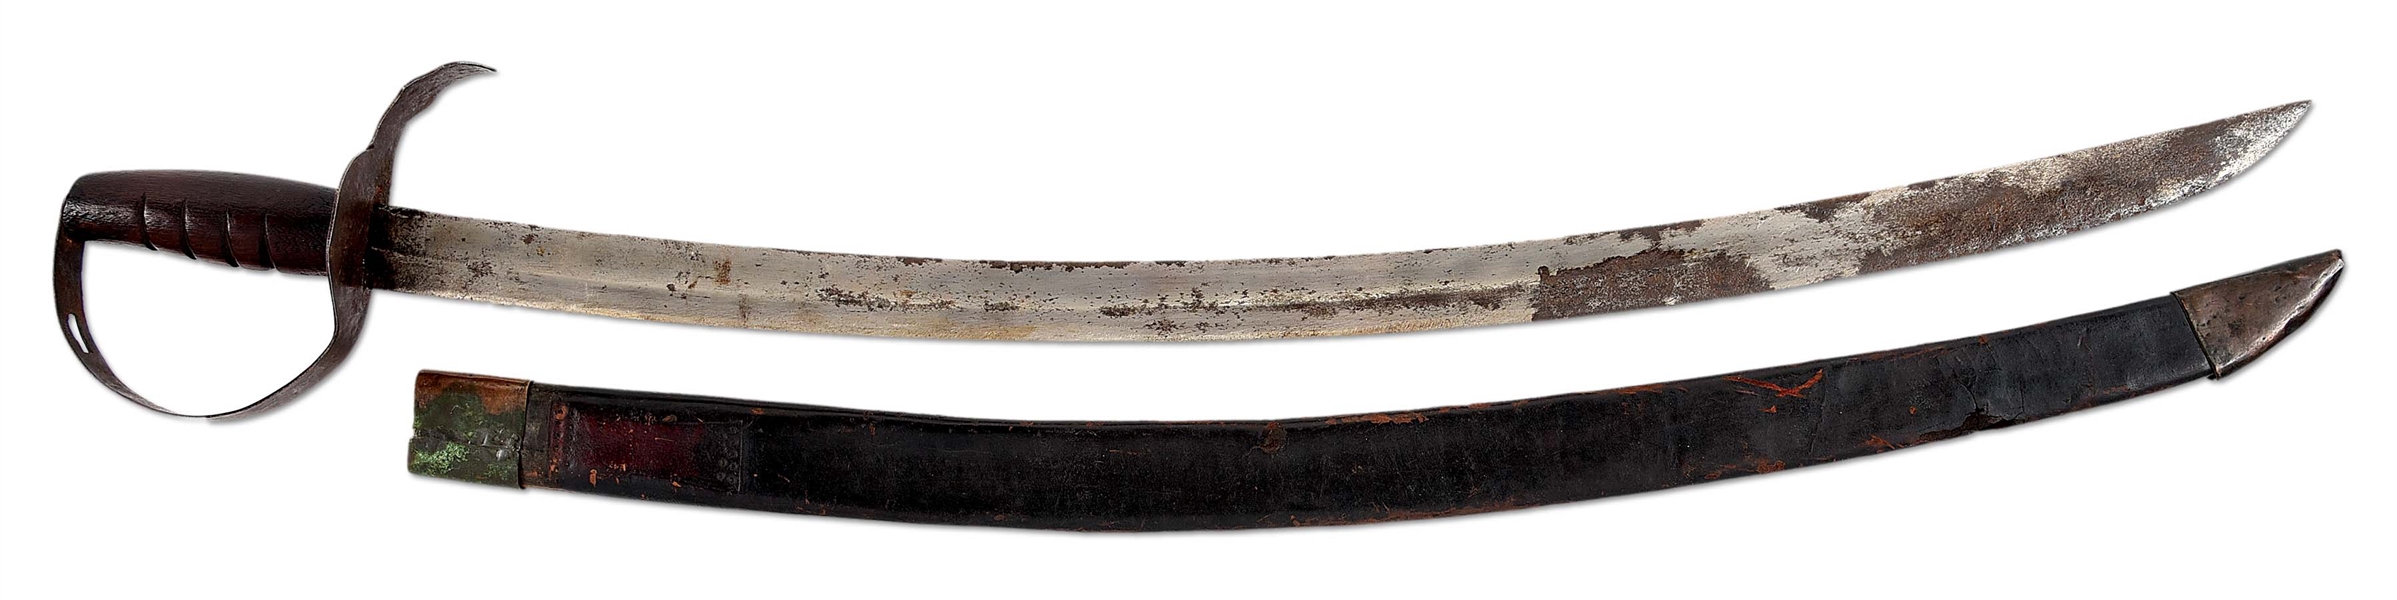 CRUDE IRON CAVALRY SABER IN THE FORM OF A NAVAL CUTLASS.